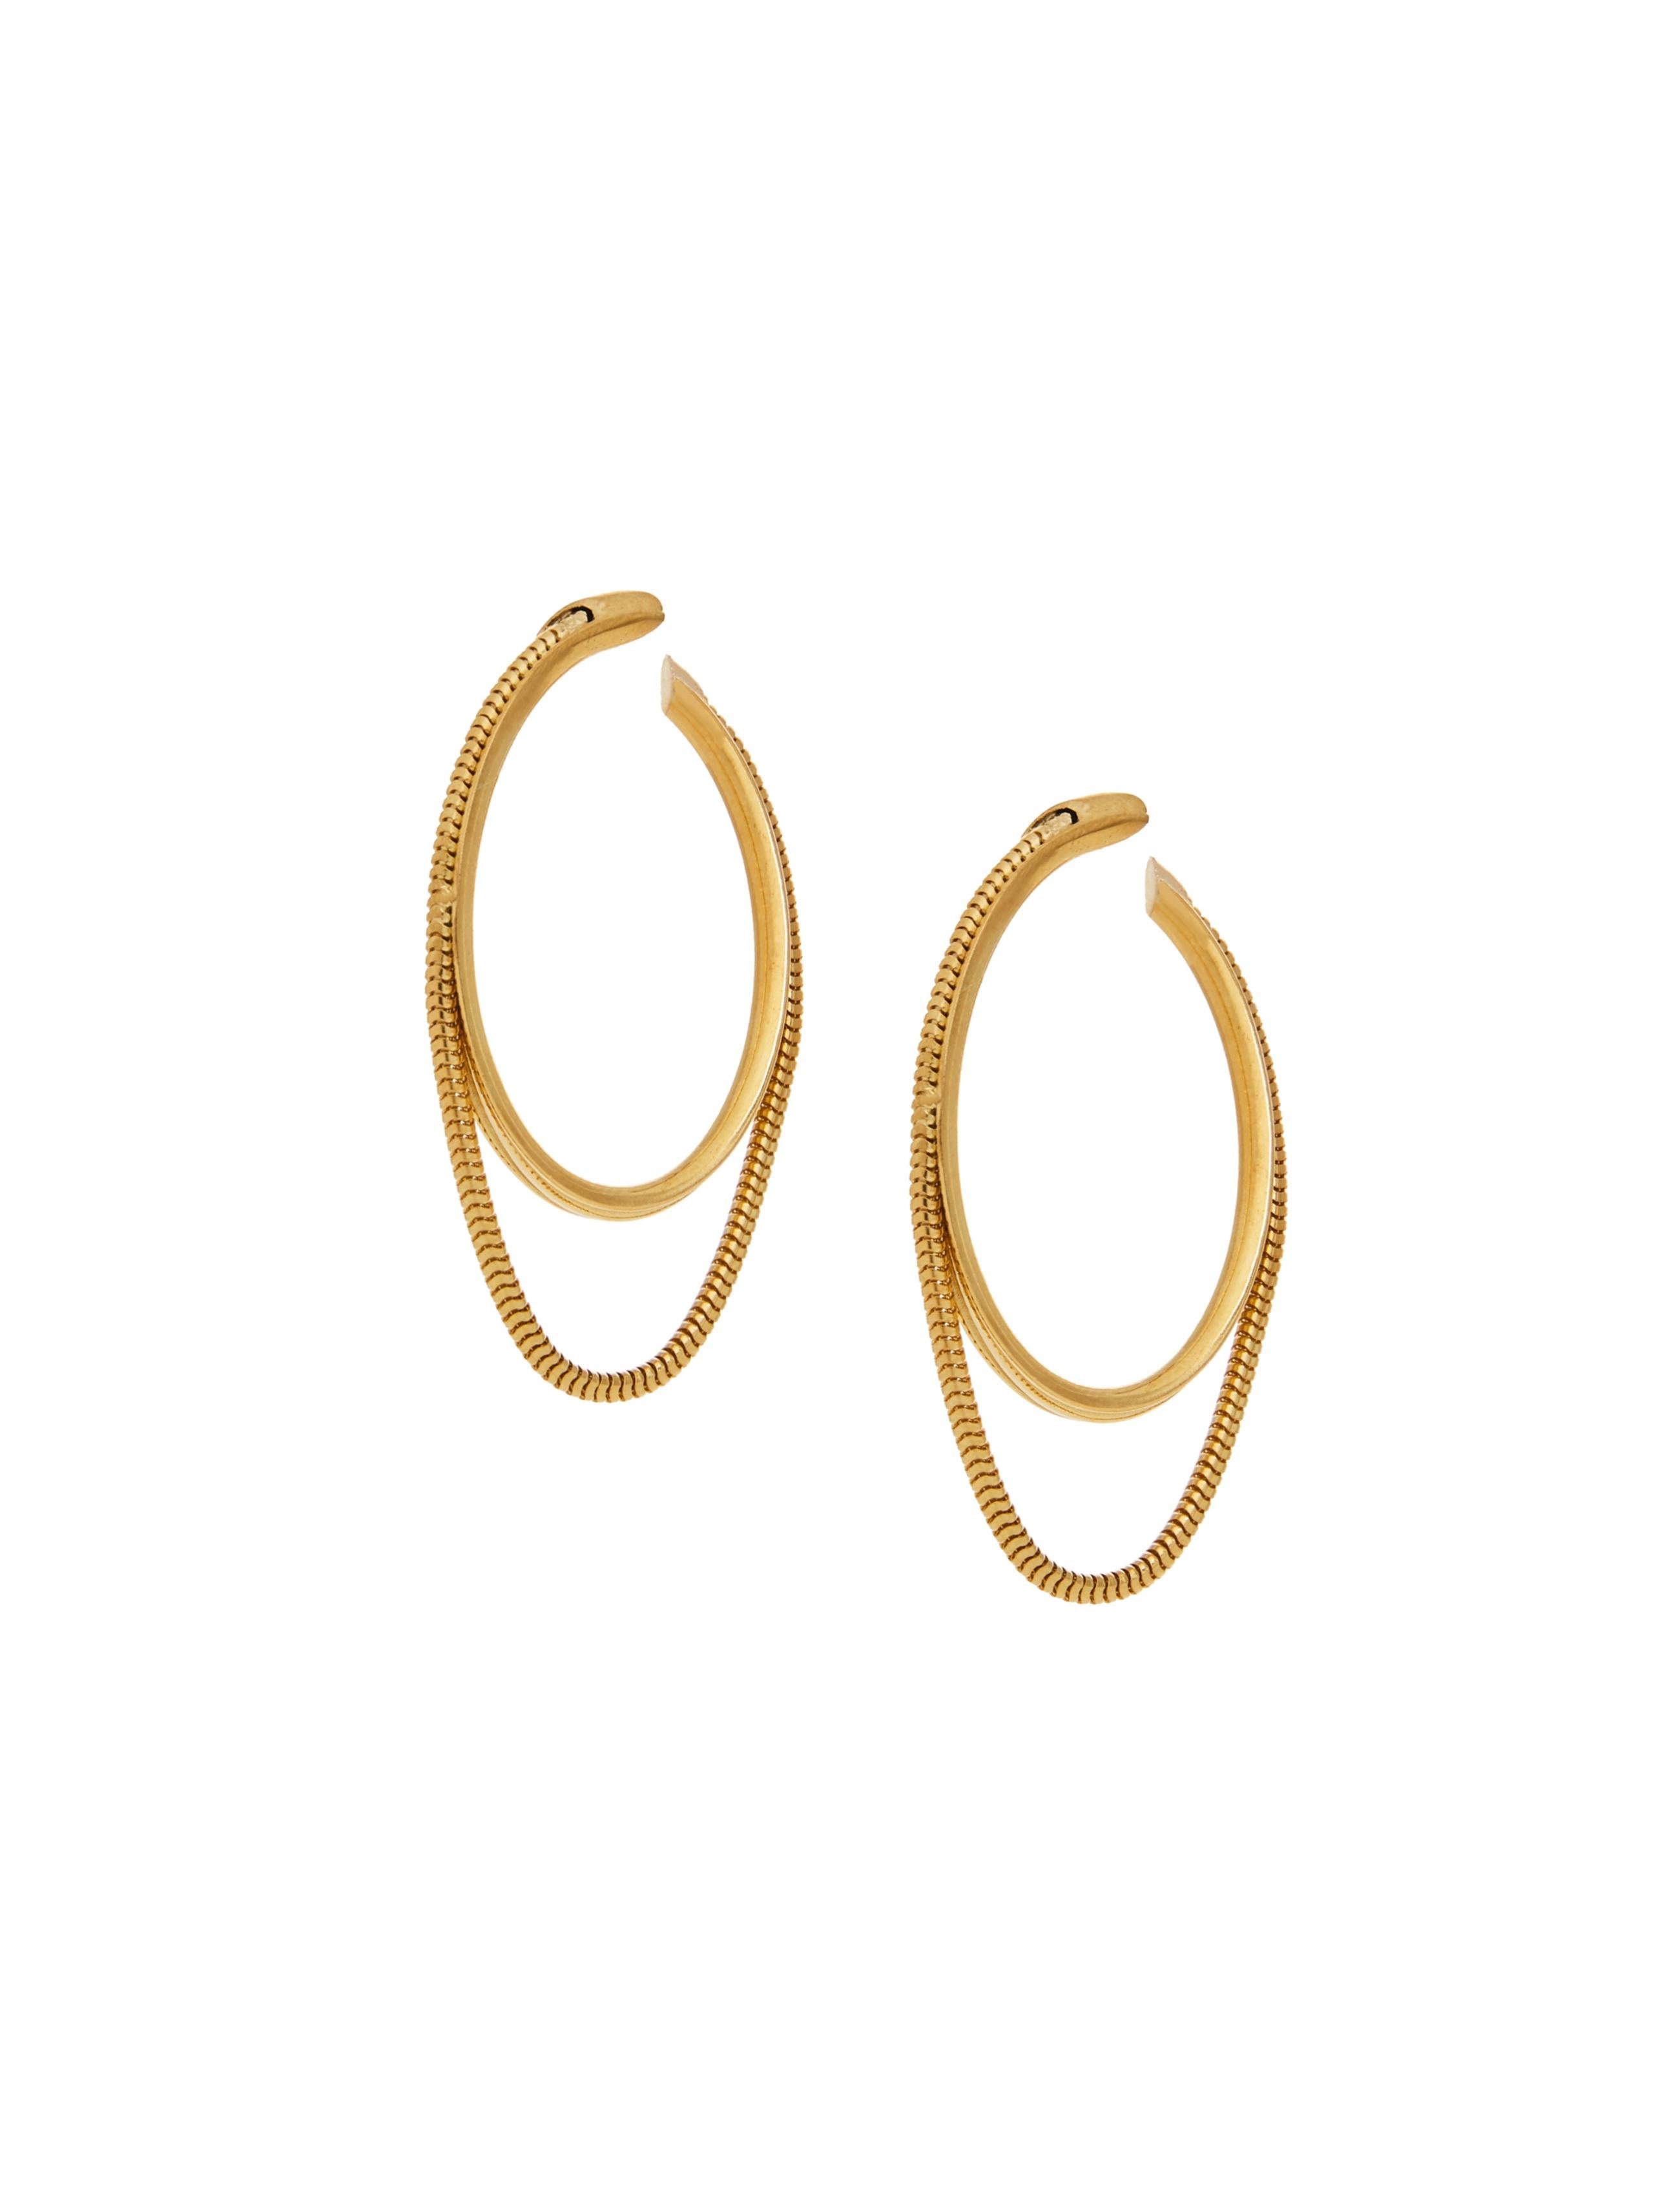 Twinkler Hoops Oval   
EXCLUSIVELY SOLD ON 1STDIBS

The twinkler oval hoops are a combination of a classic and eternal design with a touch of snake chain. This  version is the ideal shape to make a statement and their lightweight design makes them